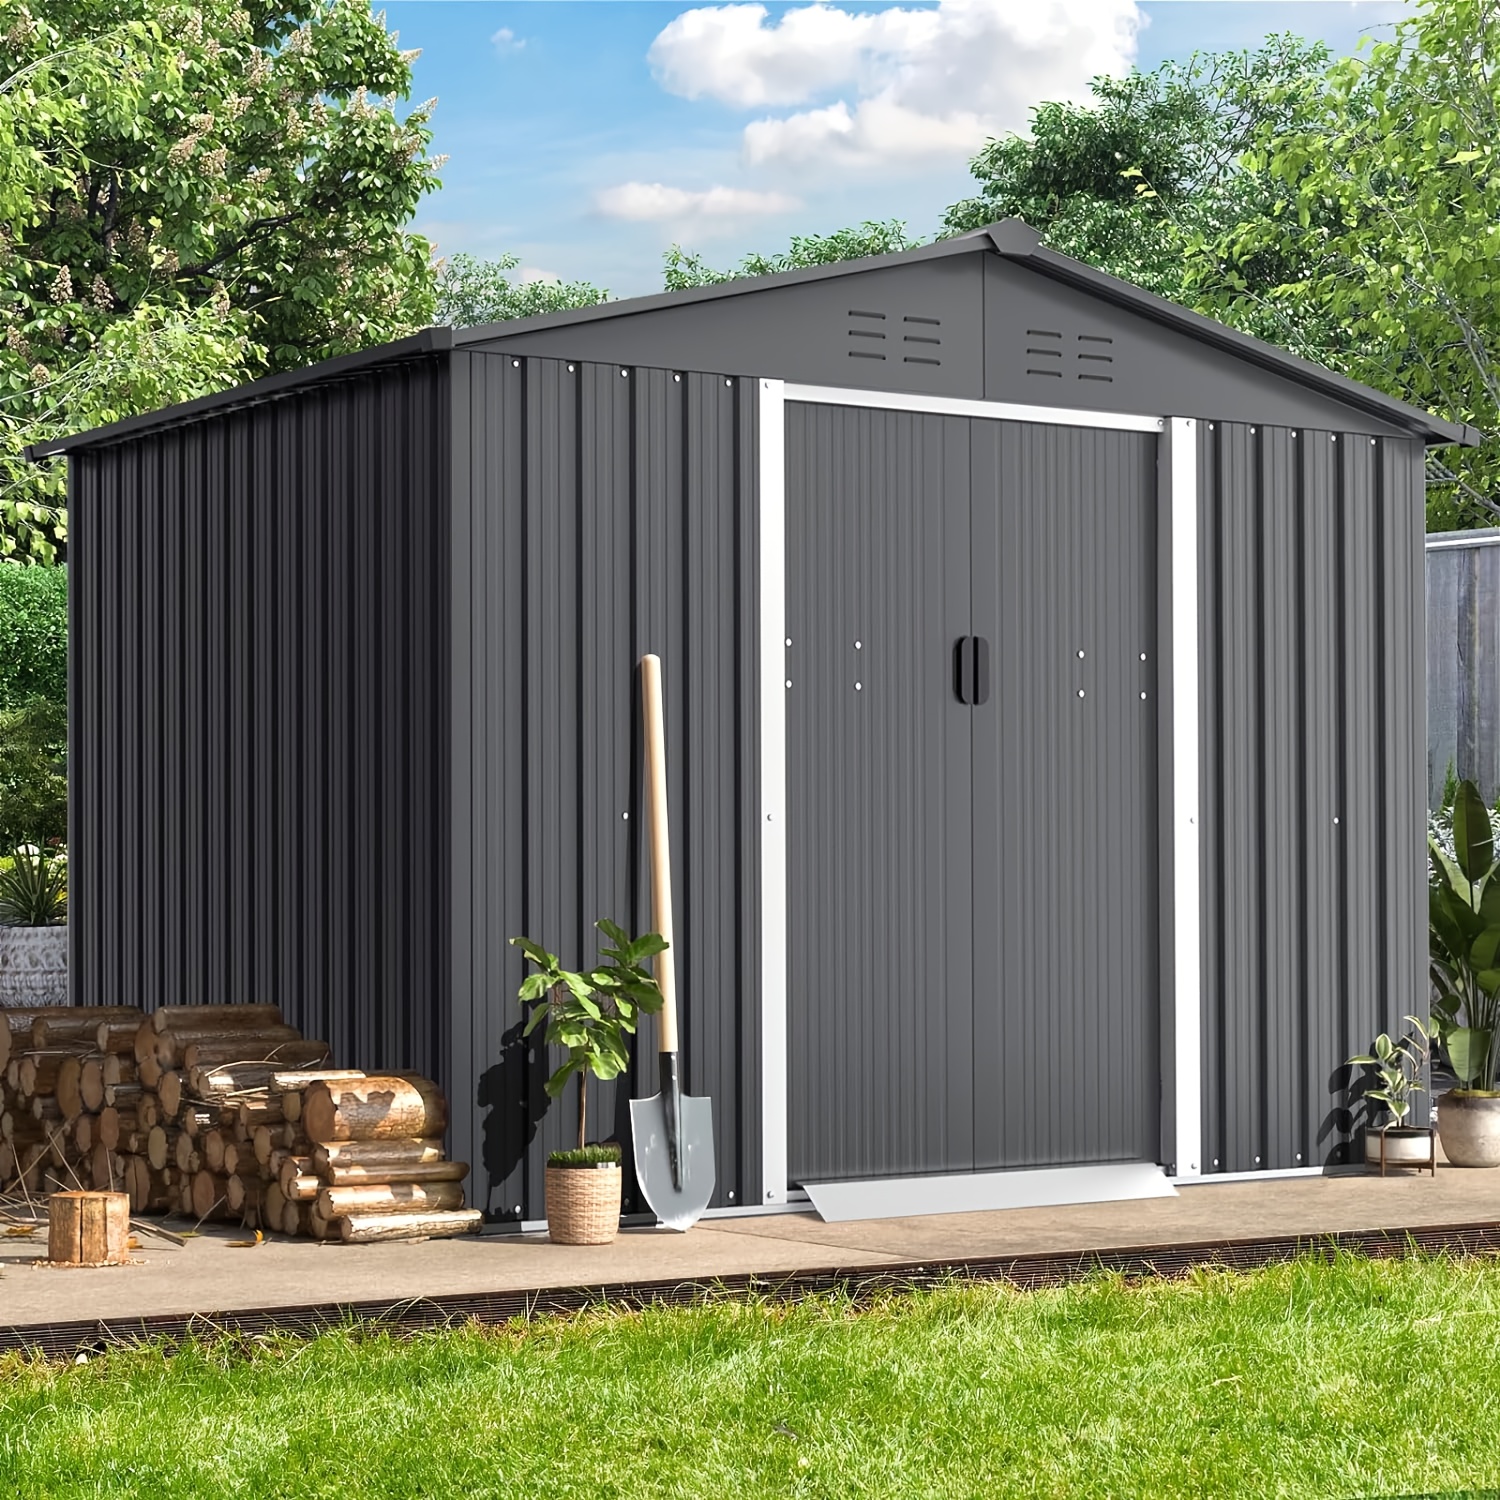 

8x6 Ft Spacious Waterproof Metal Storage Shed, Sliding Door, Lawn Equipment Organizer, Garden, Backyard Storage Solution, Durable, Rust-resistant, And Easy To Assemble, Gray